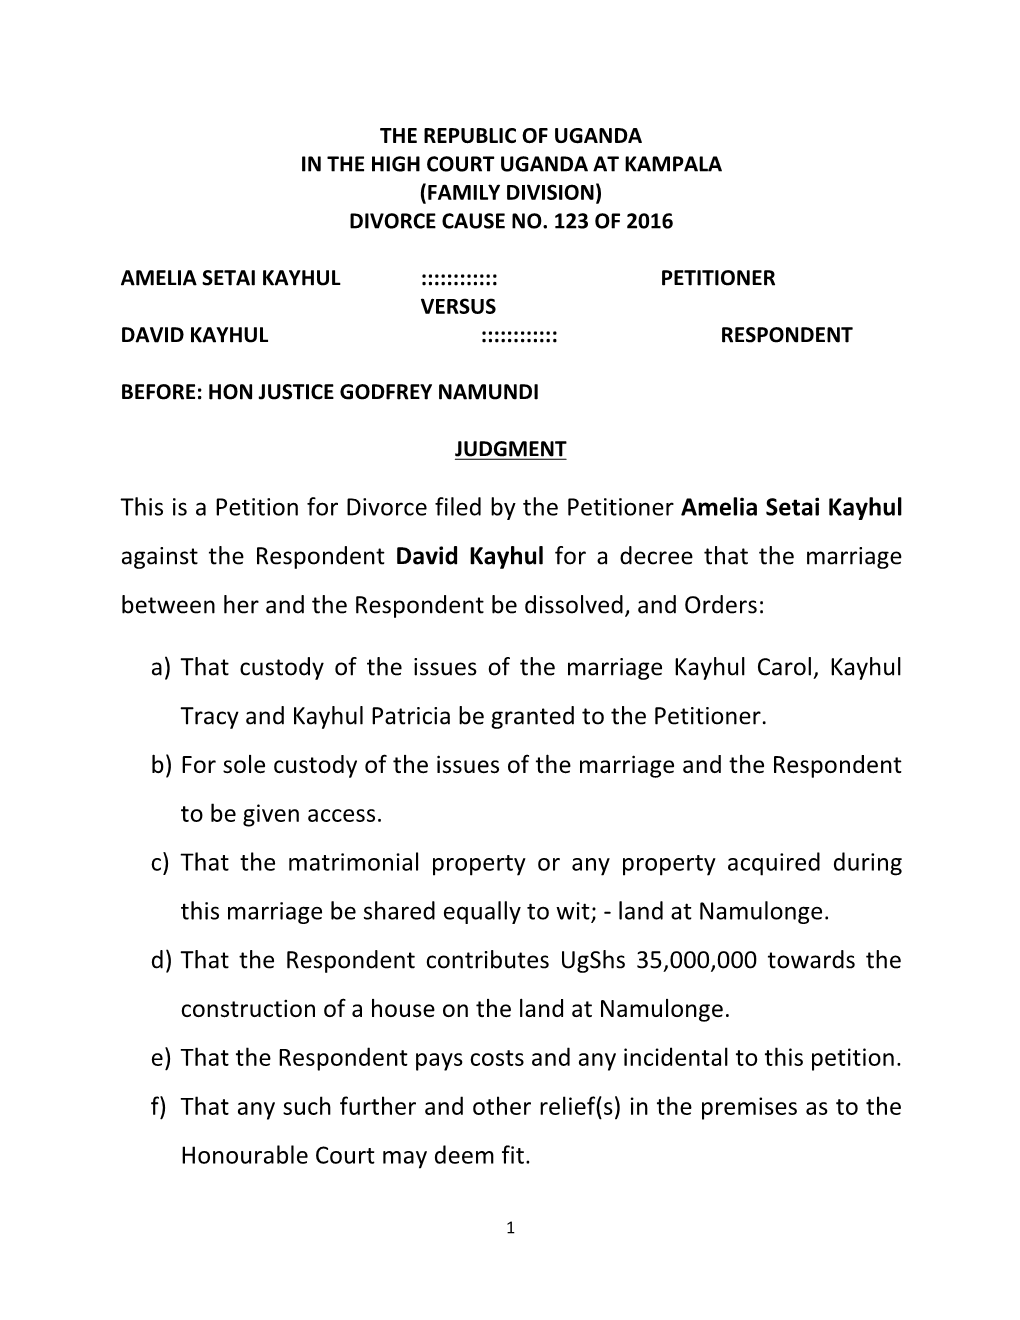 This Is a Petition for Divorce Filed by the Petitioner Amelia Setai Kayhul